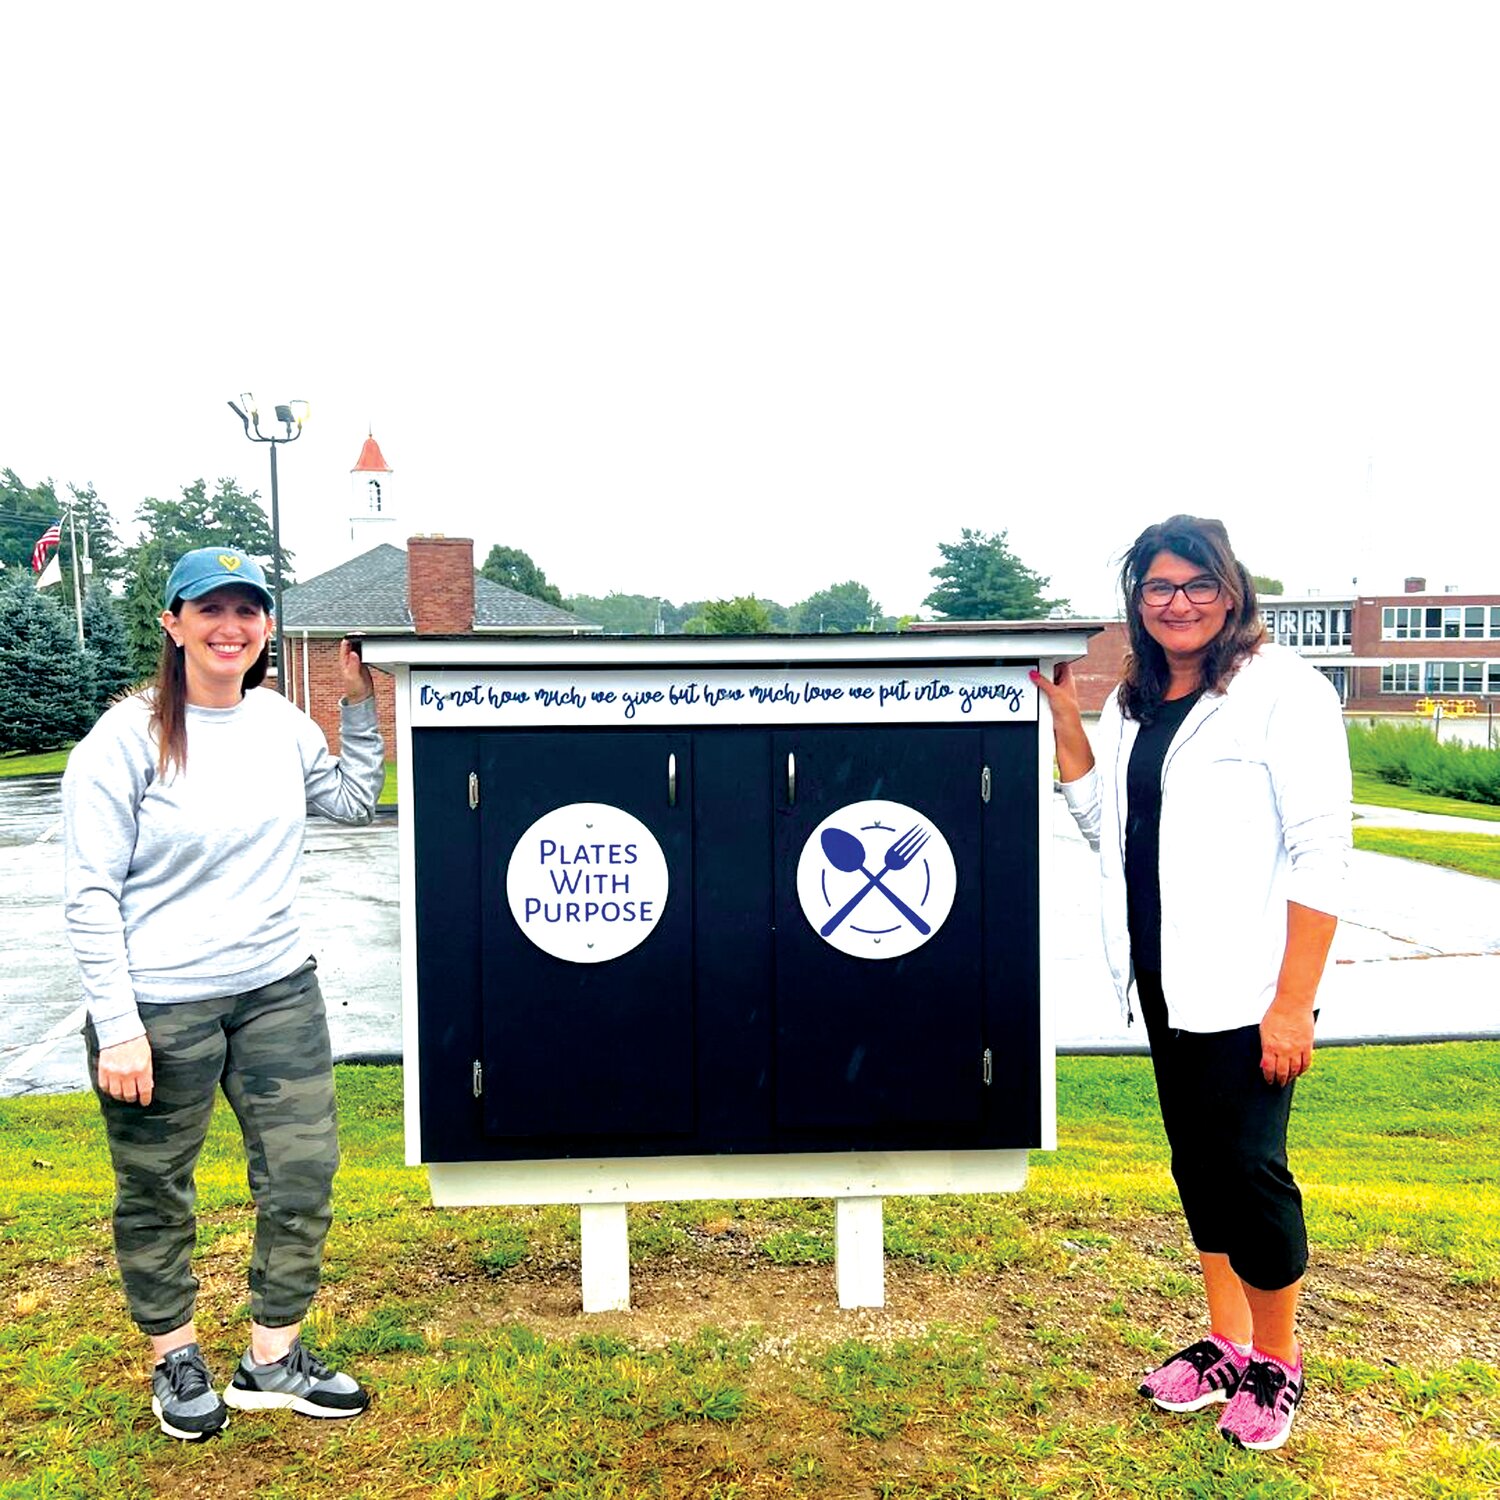 A BIT OF HOPE: Jenn Capracotta and Jen Fantozzi have fully stocked the Hope Chest they placed along Memorial Avenue next to Marian J. Mohr Memorial Library. The co-founders of Plates With Purpose have also opened a second Hope Chest in North Providence. (Photos courtesy Jenn Capracotta)